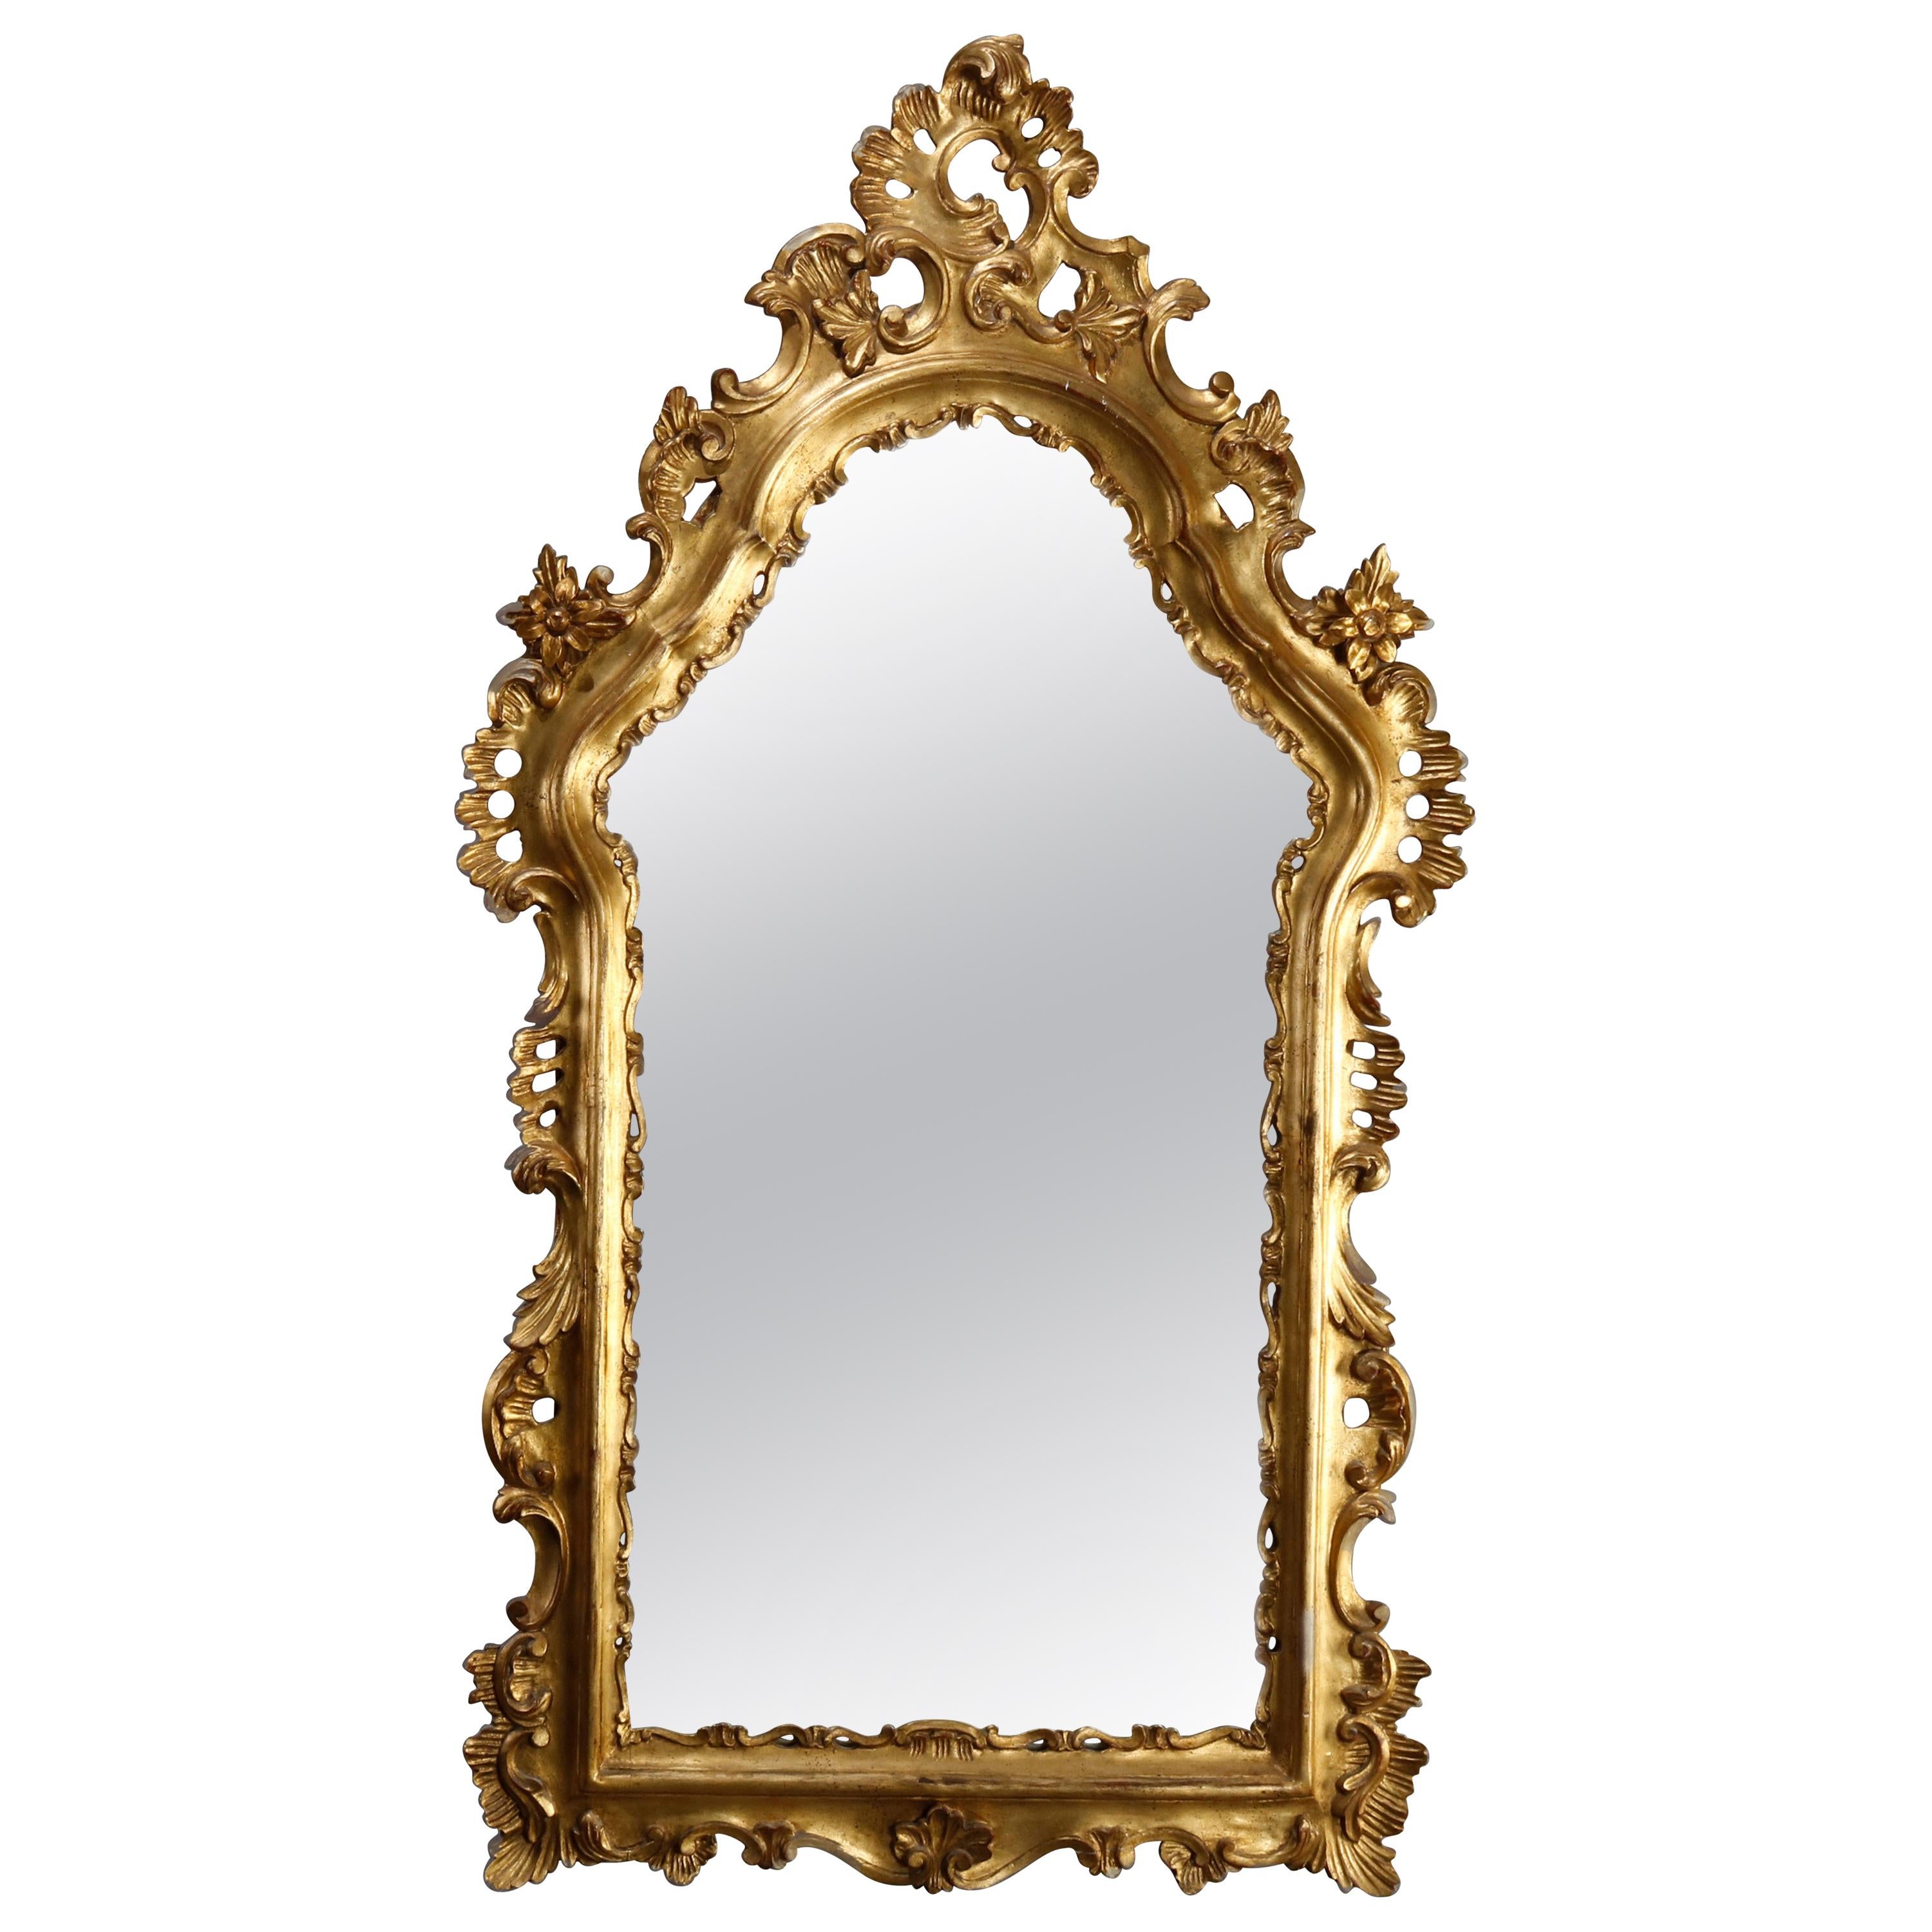 Oversized French Rococo Style Giltwood over Mantel Mirror, 20th Century